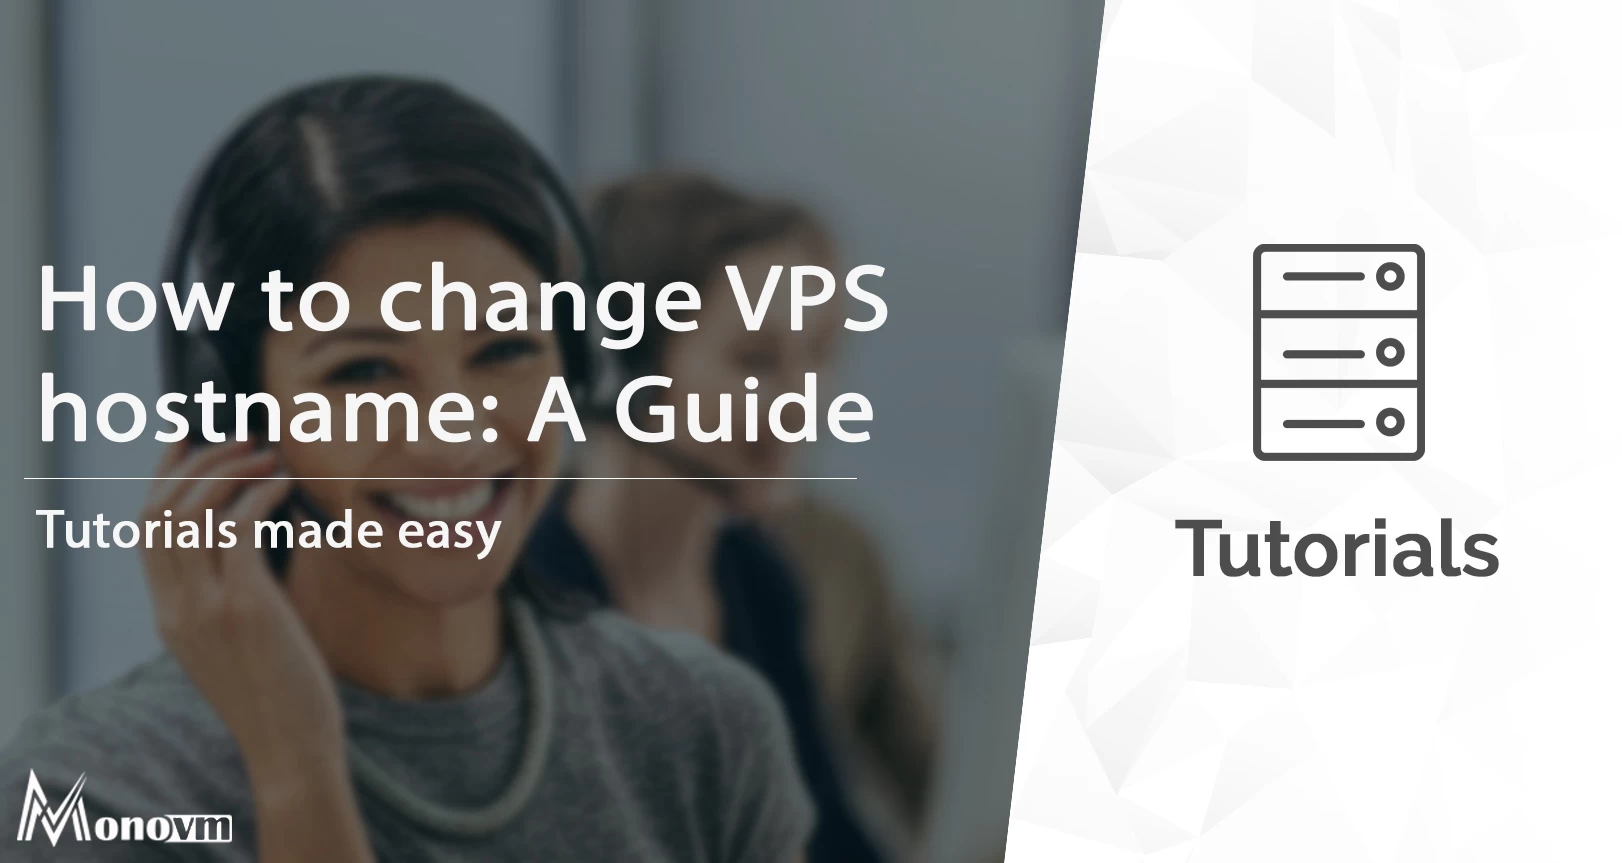 What is my VPS hostname, and how to change VPS Hostname?